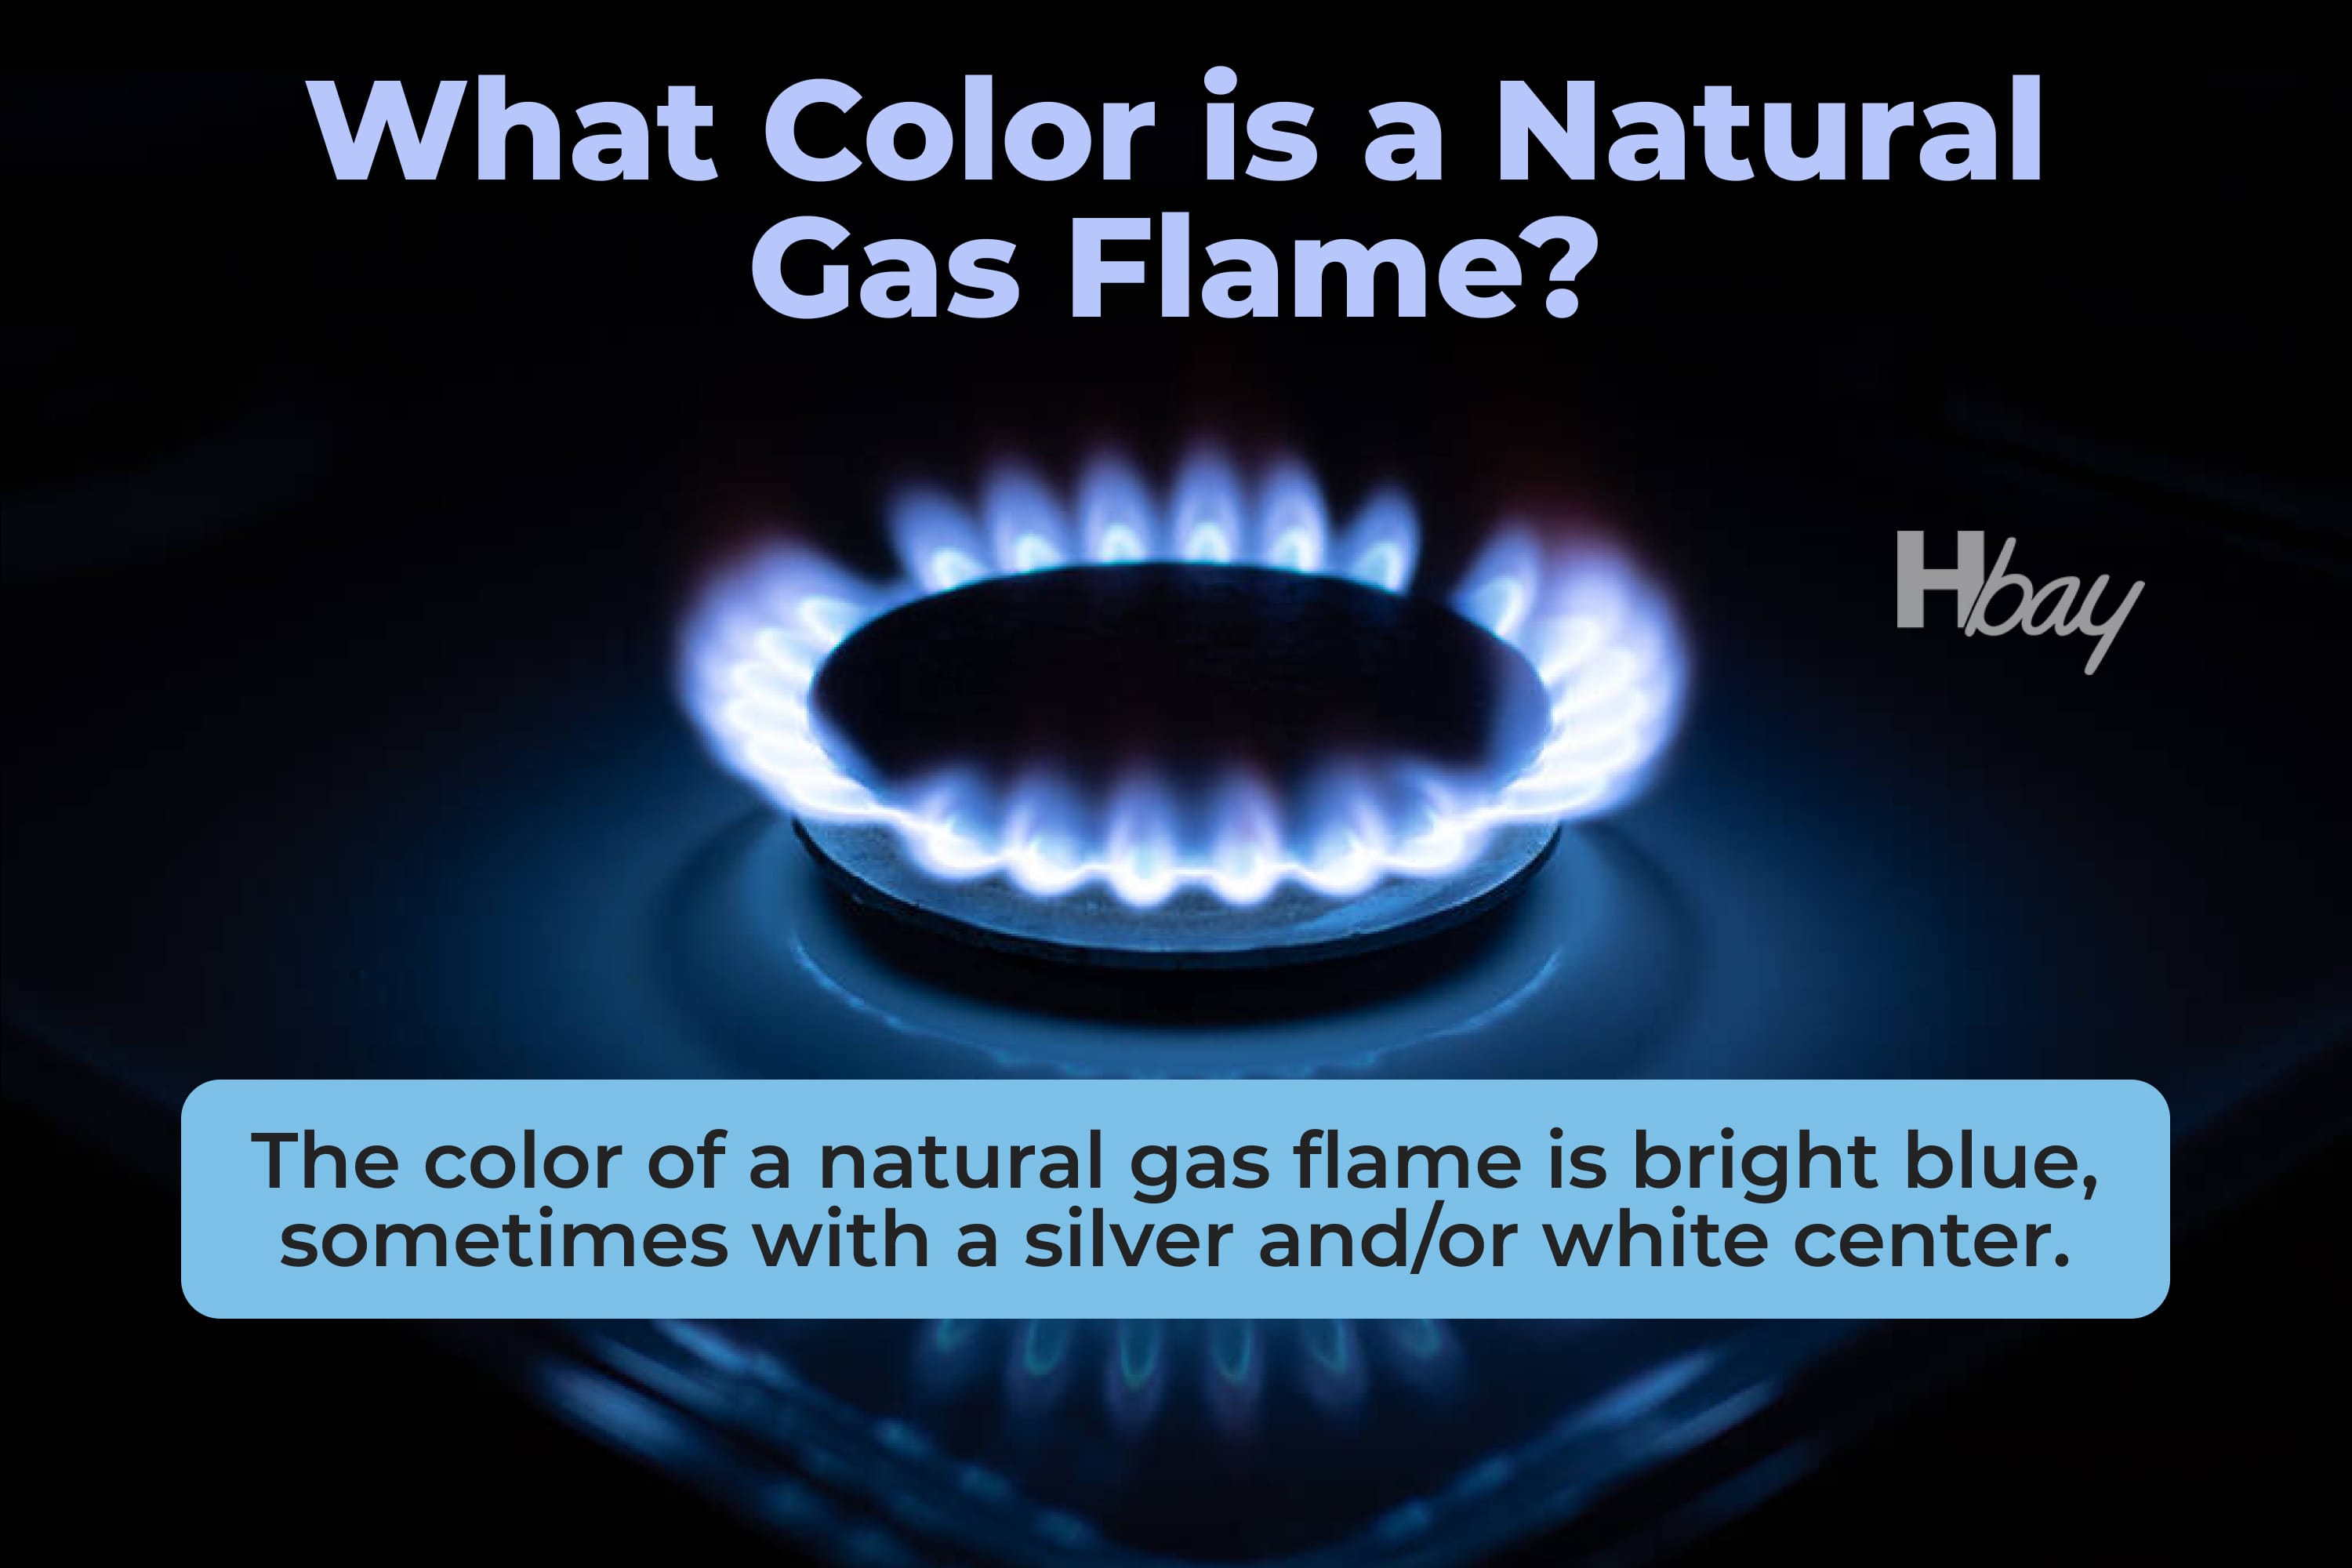 What color is a natural gas flame